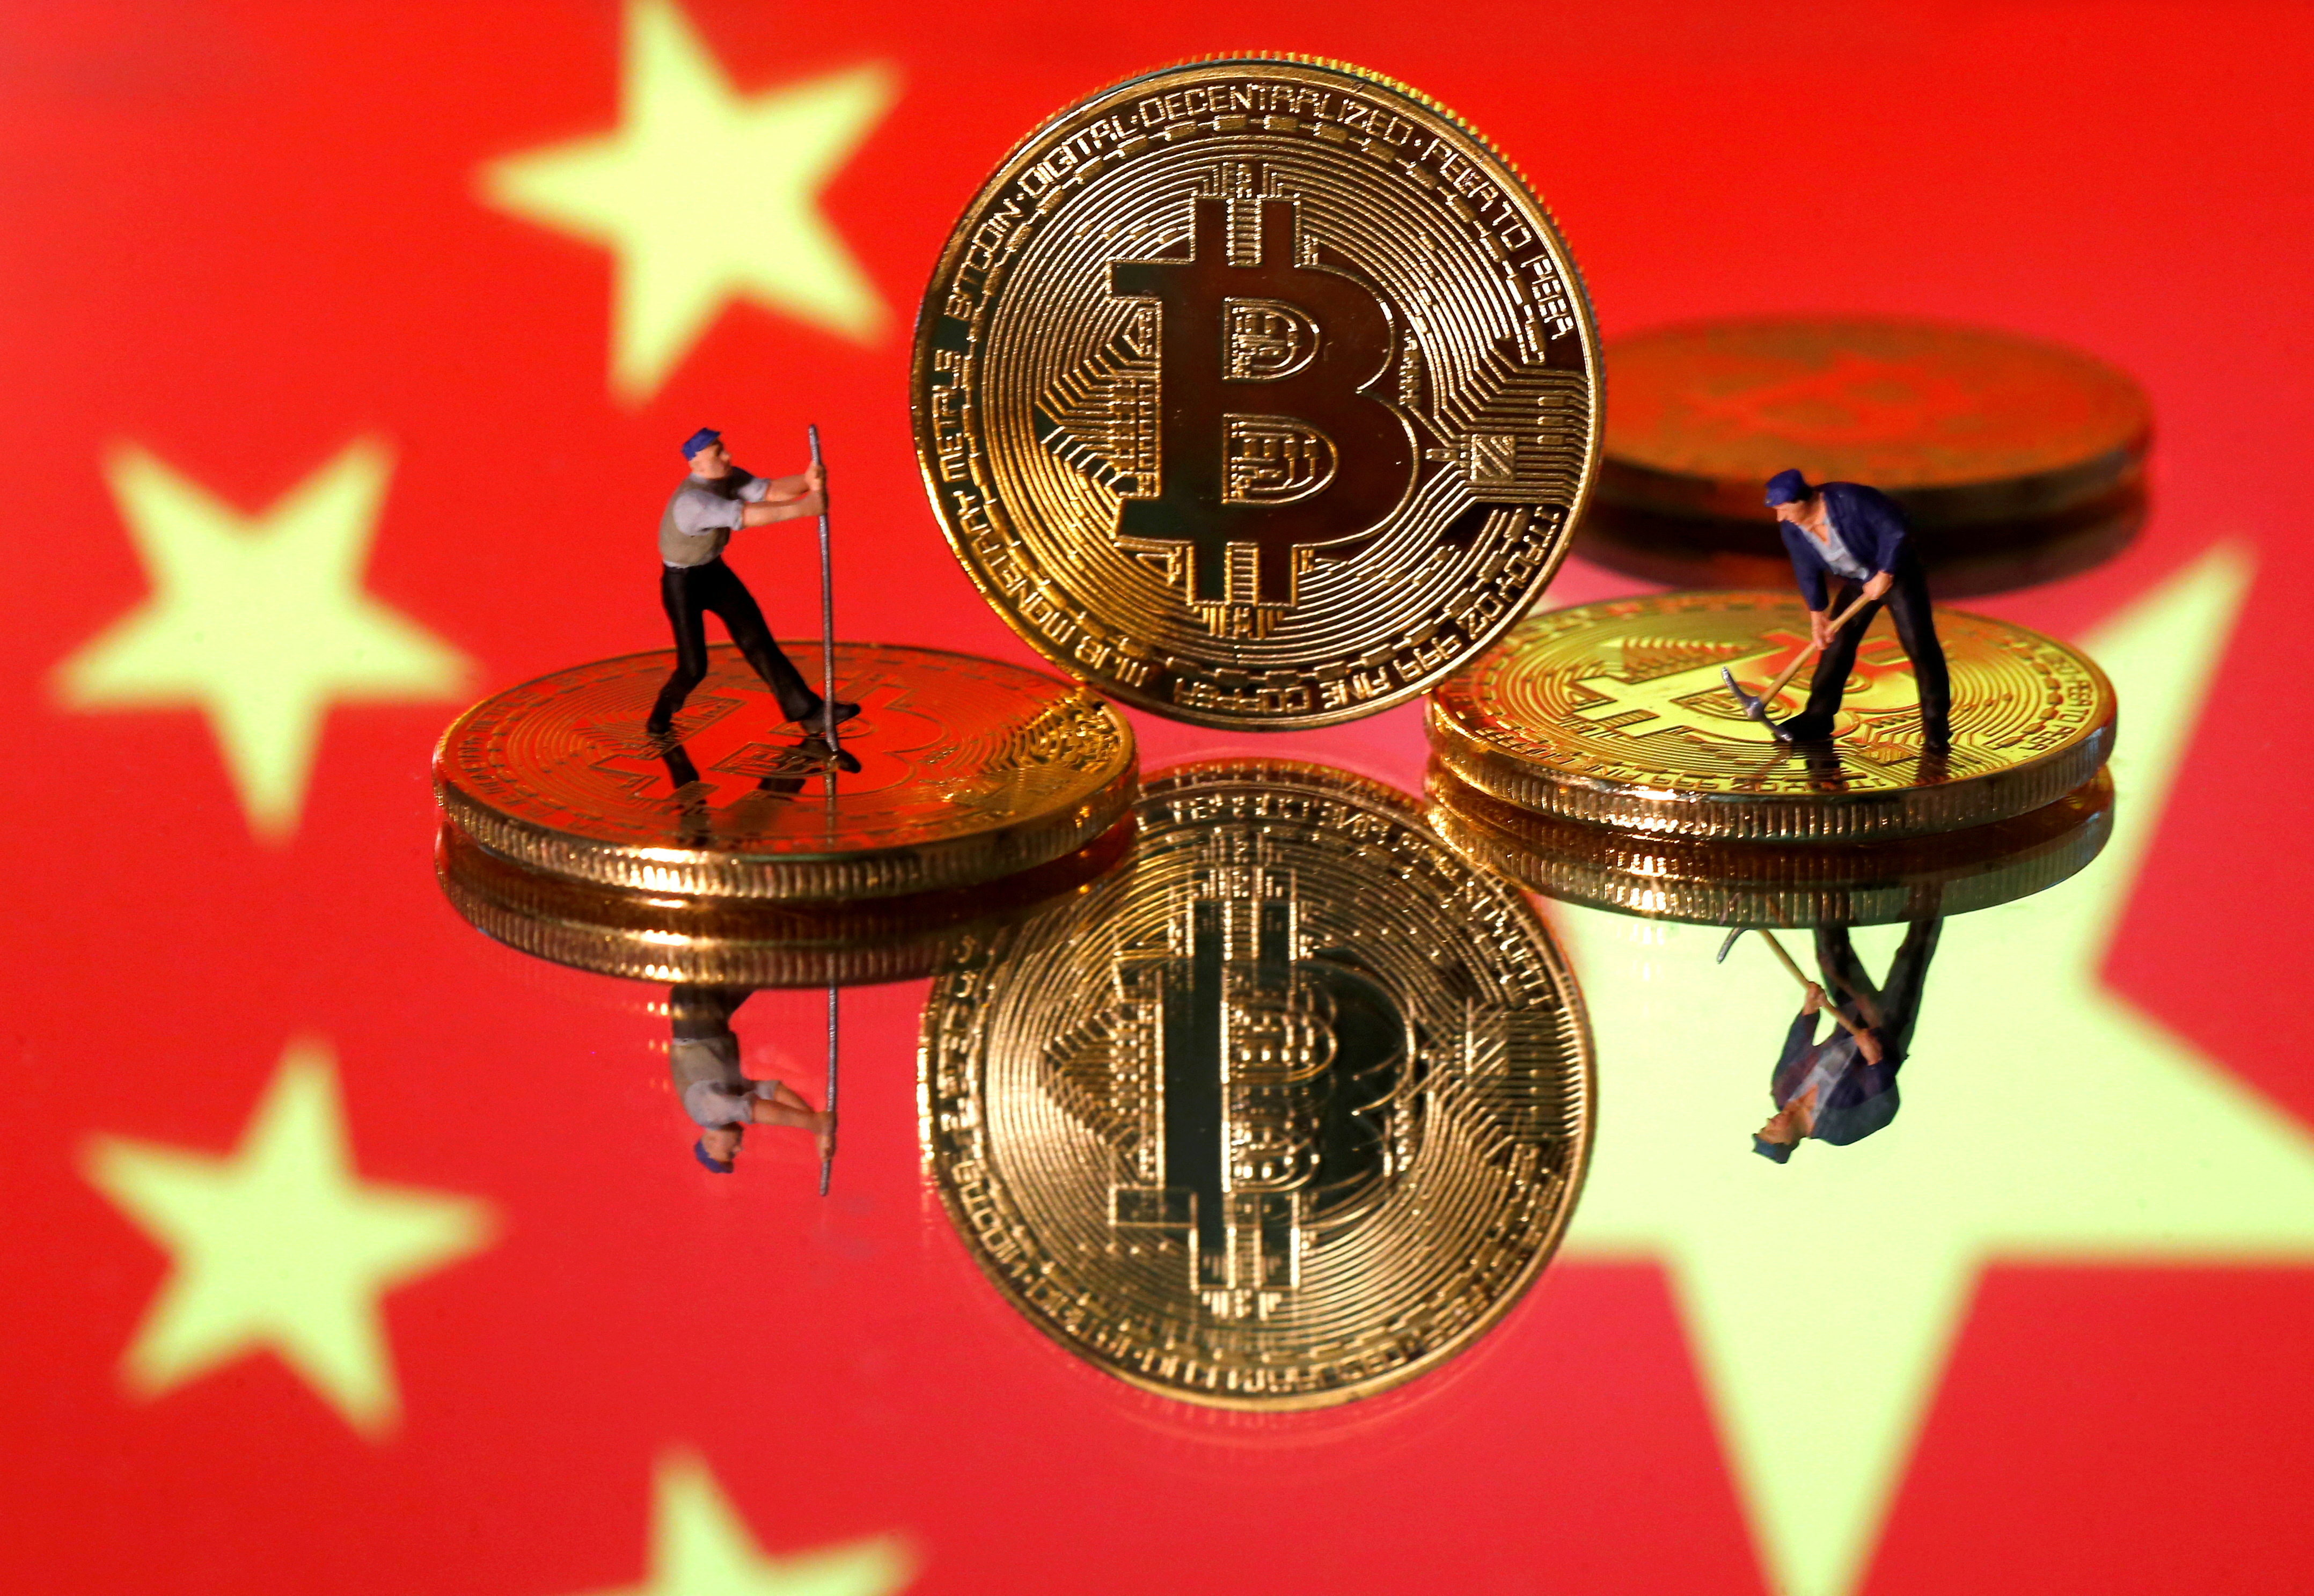 Small toy figurines are seen on representations of the Bitcoin virtual currency displayed in front of an image of China's flag in this illustration picture, April 9, 2019. REUTERS/Dado Ruvic/Illustration